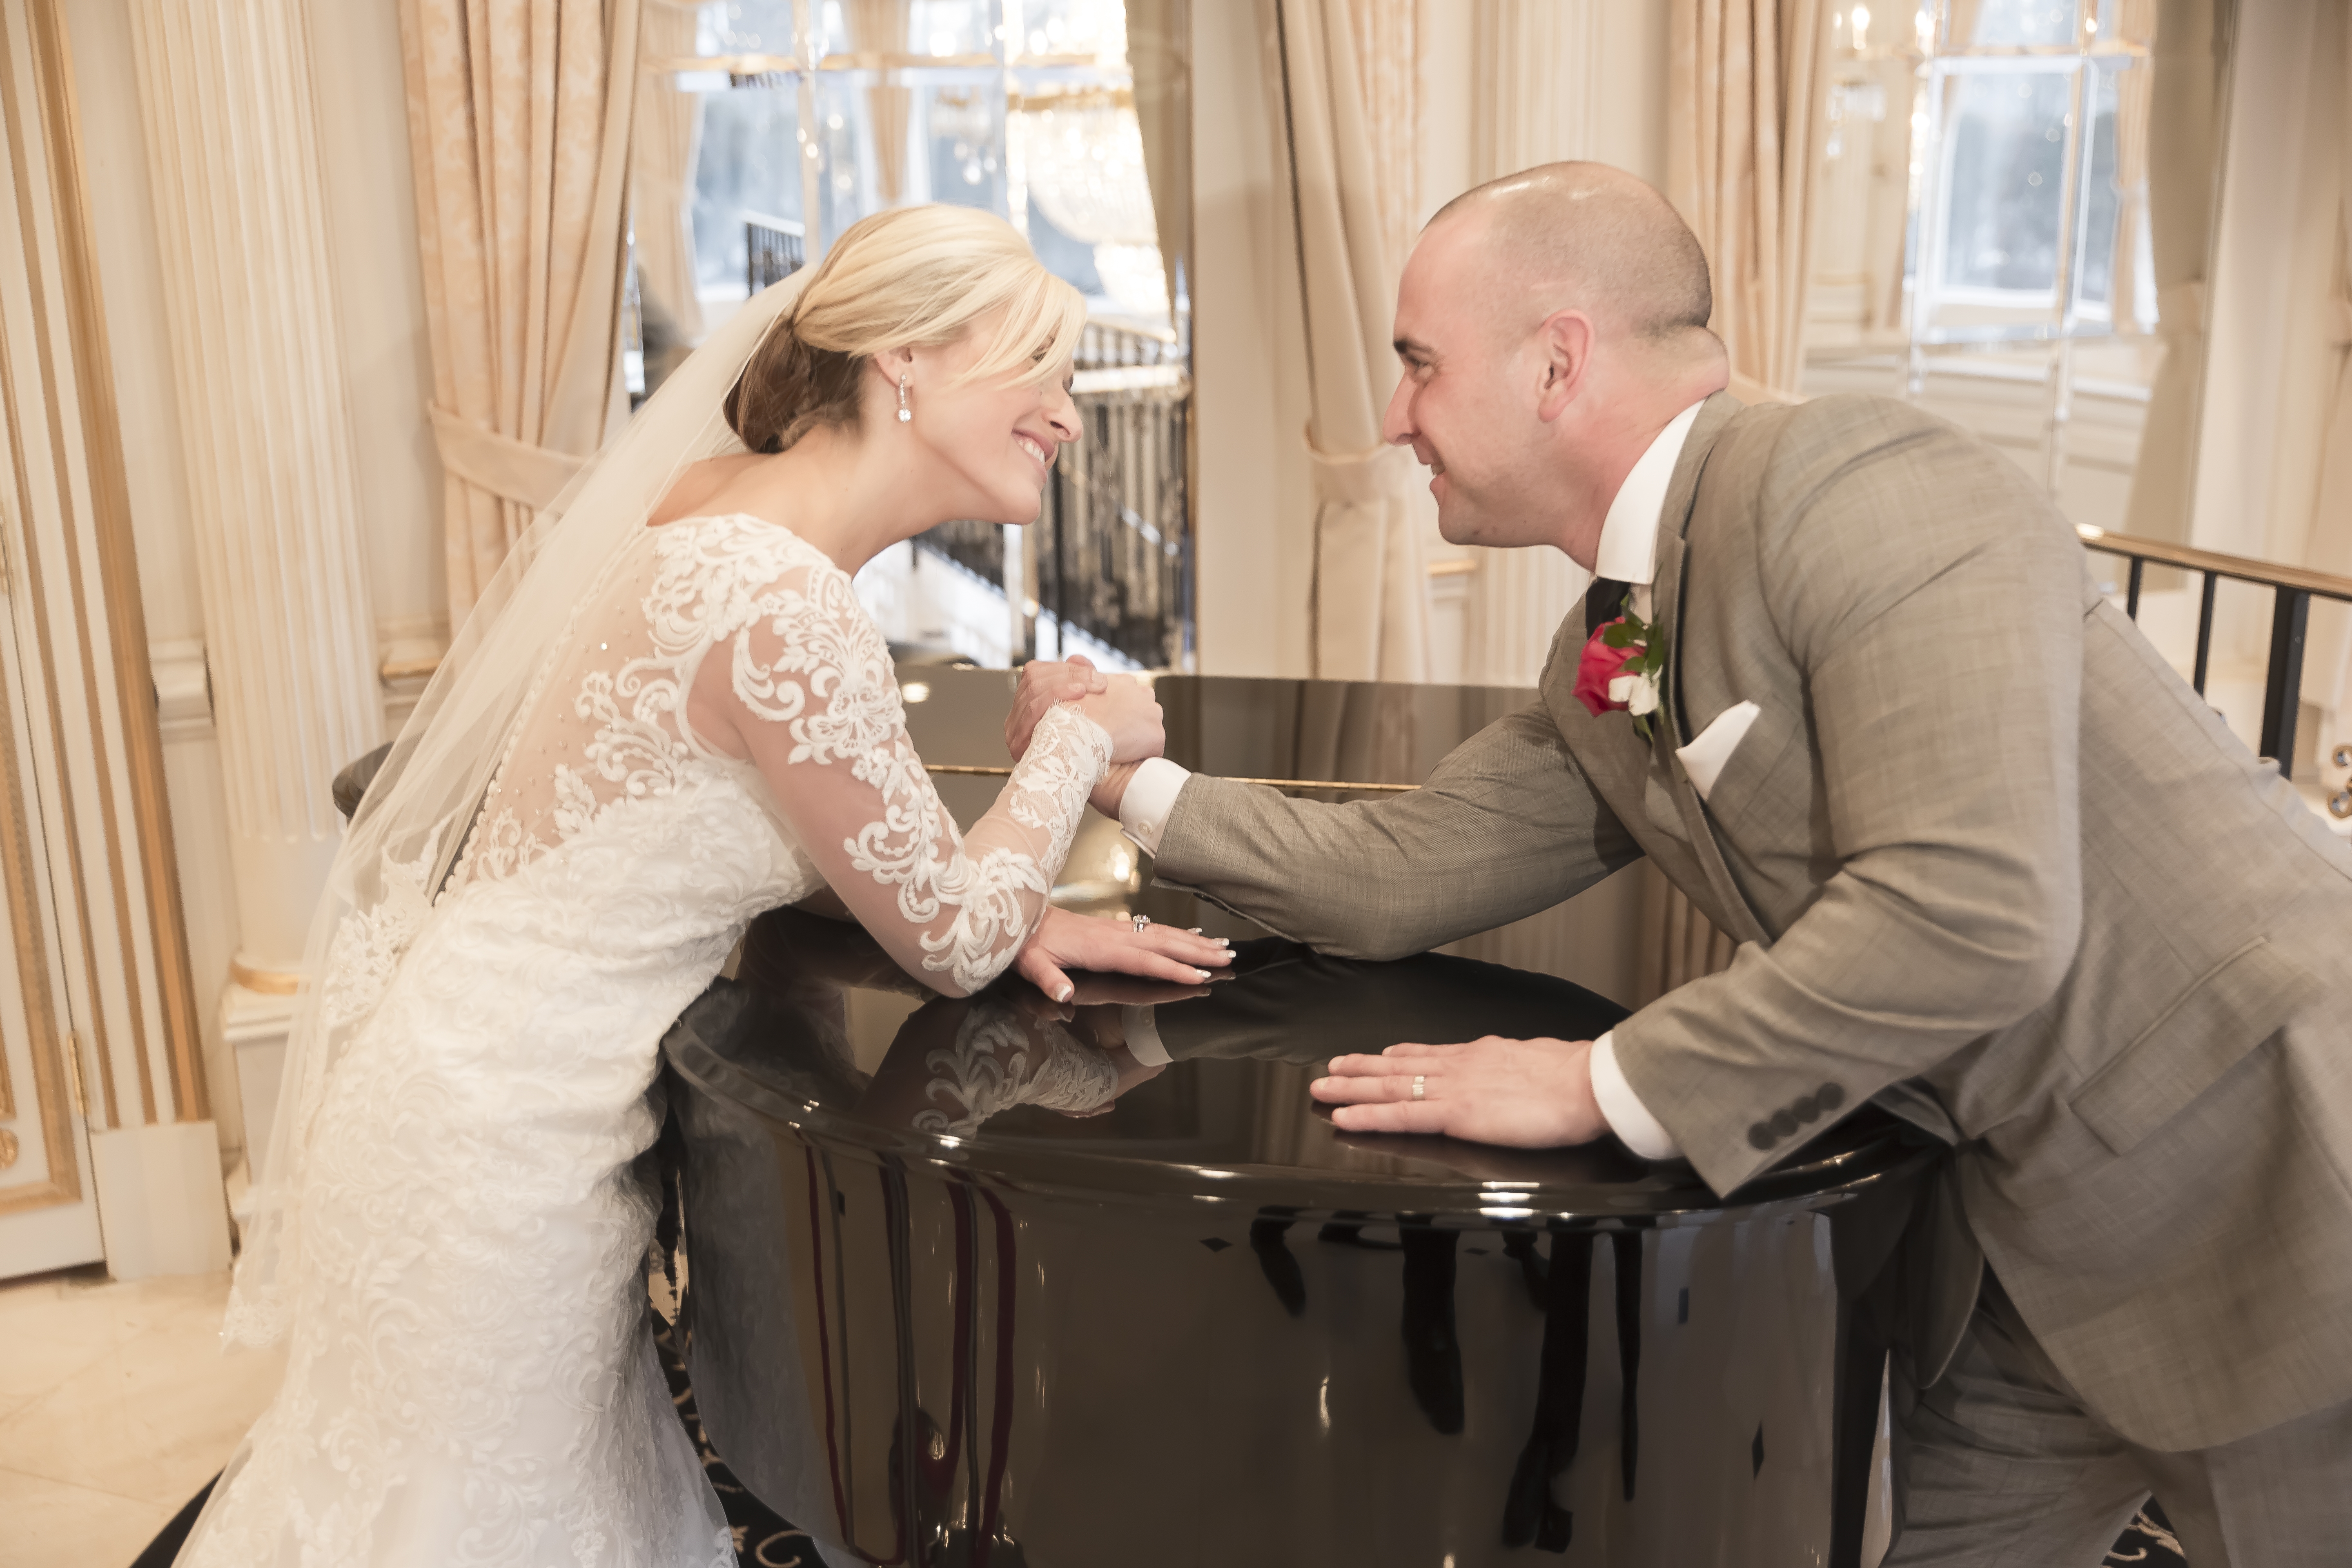 Beautiful NJ Bride Beats Groom in Loving Arm Wrestle Moments Before Reception Begins- The Tides in North Haledon, NJ